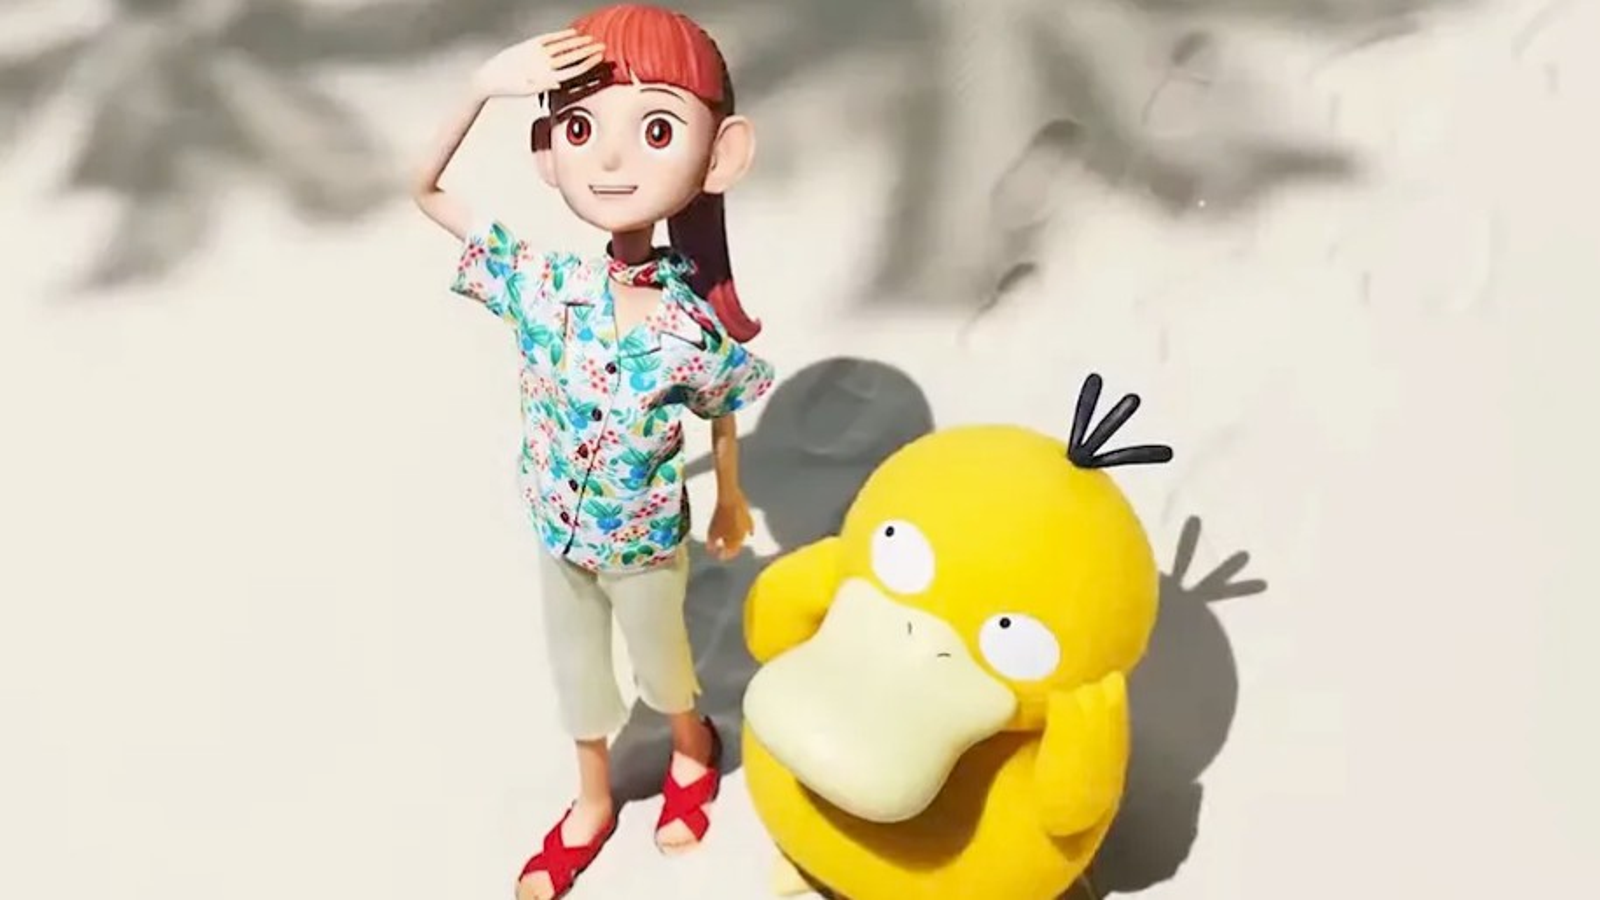 Pikachu & Psyduck Star in Super-Cute Pokemon Animated Short with Pokemon  Quest Visuals